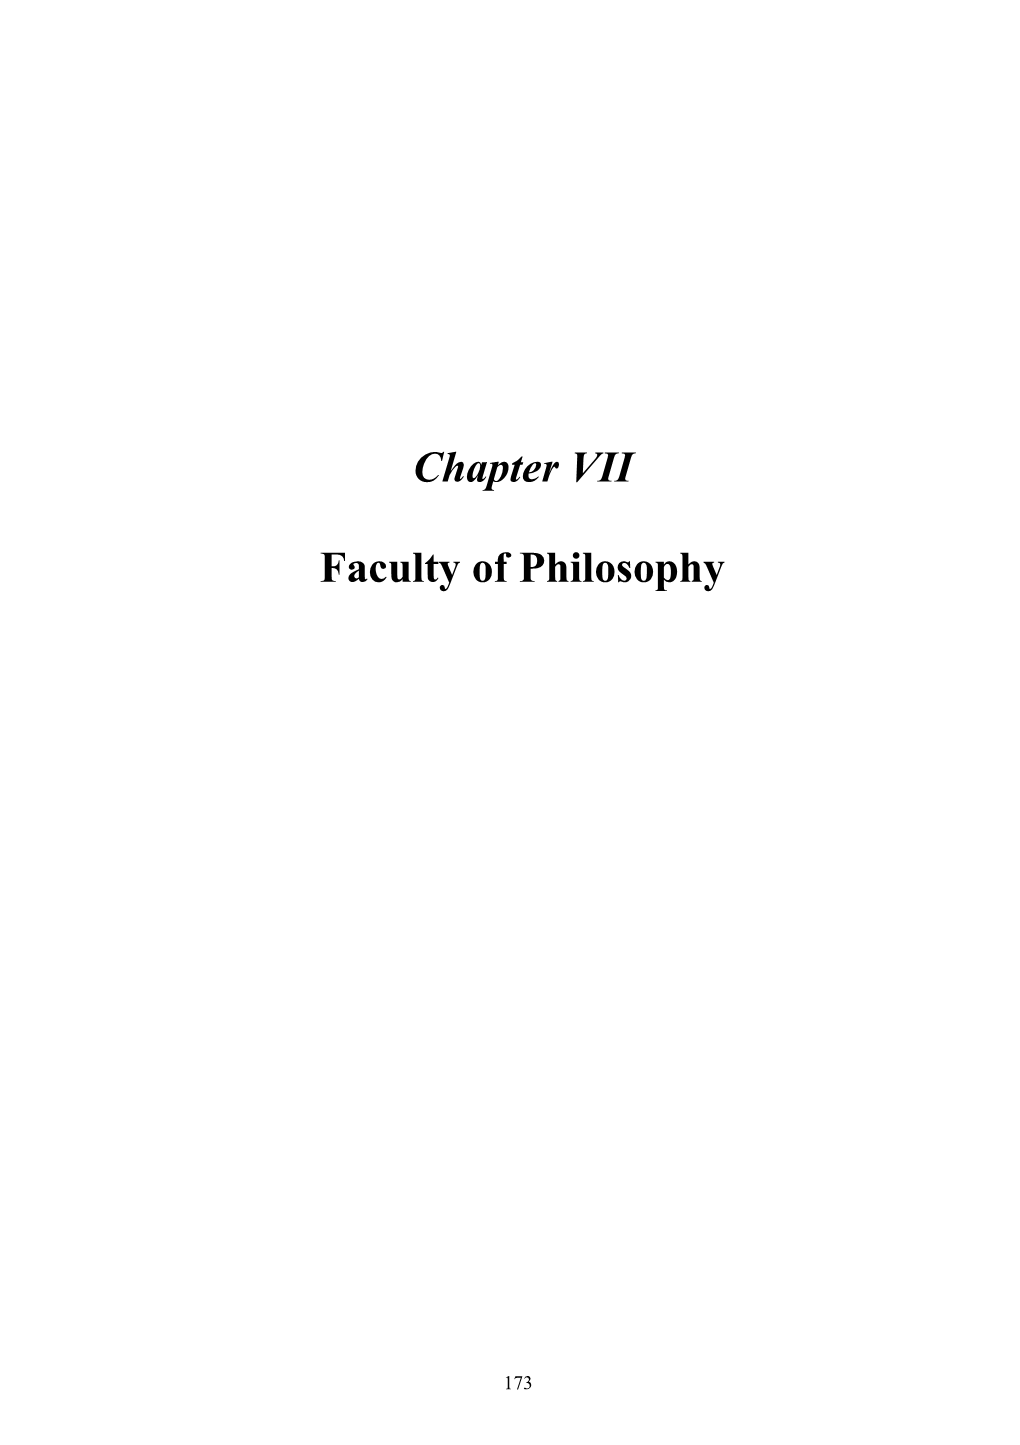 Chapter VII Faculty of Philosophy